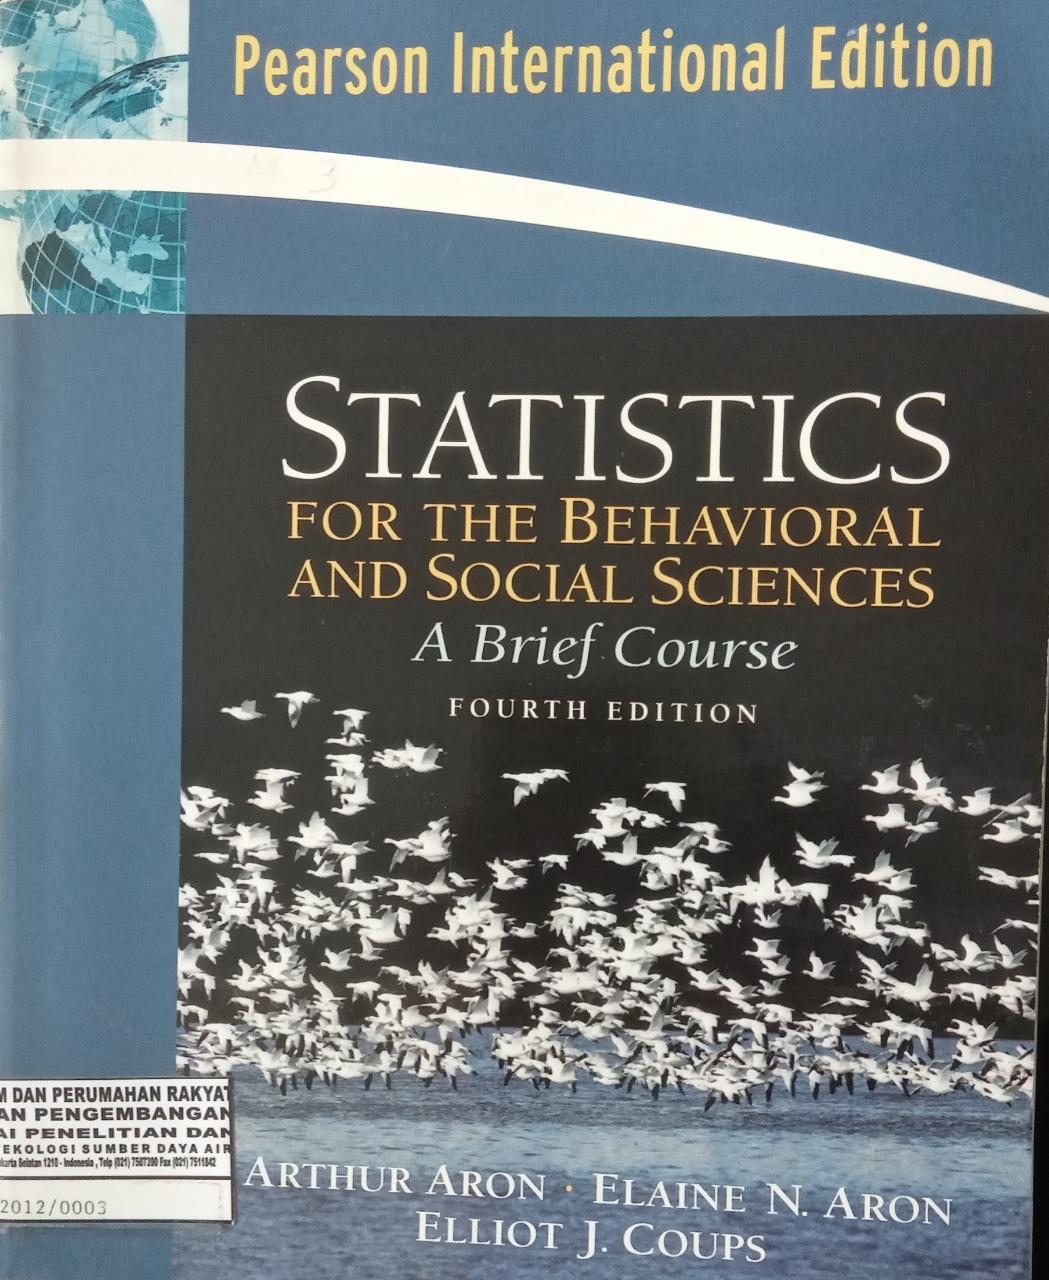 STATISTICS FOR THE BEHAVIORAL AND SOCIAL SCIENCES